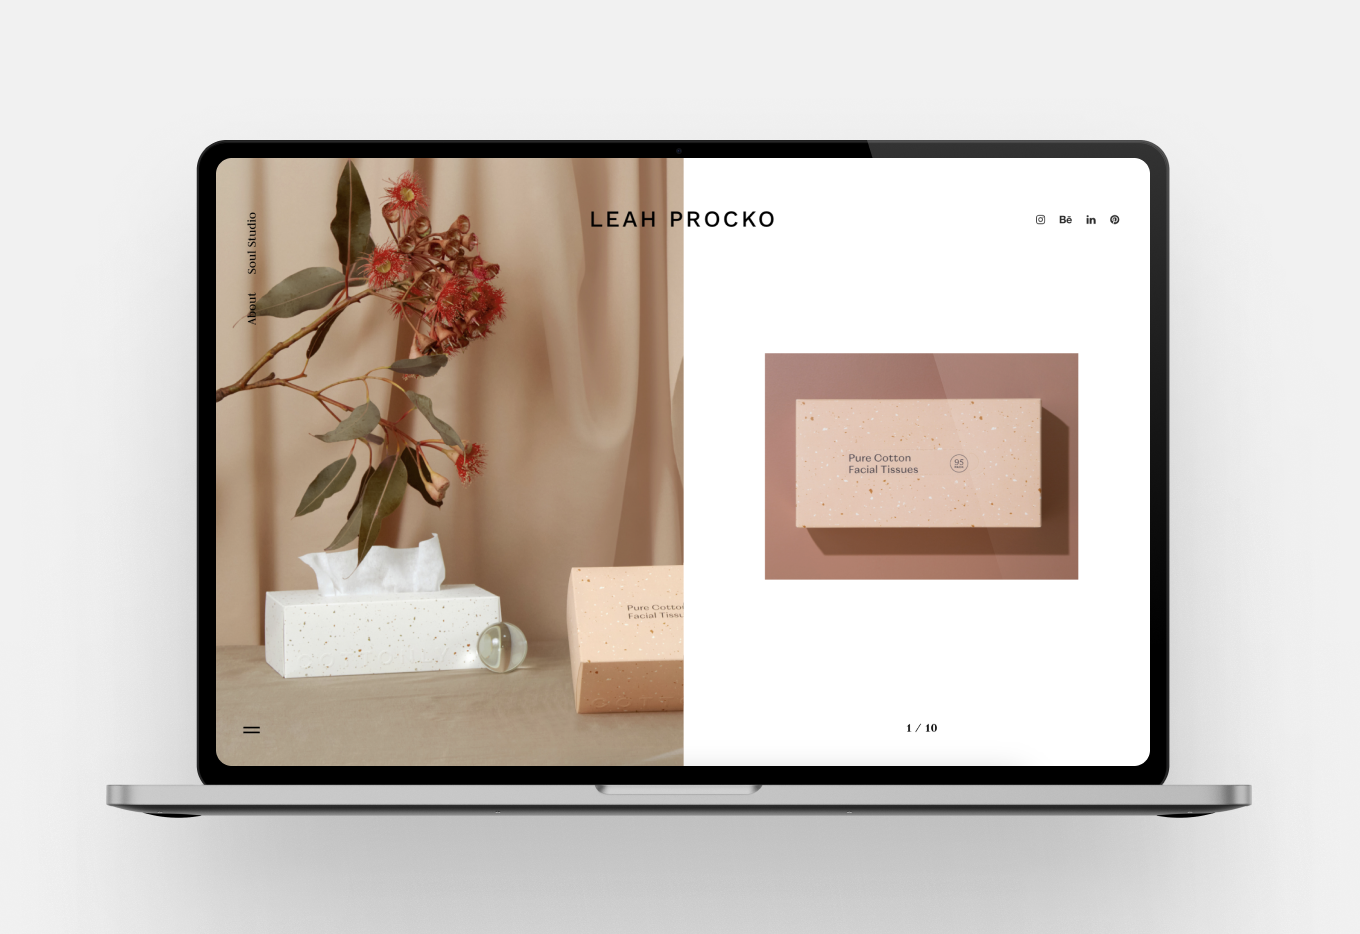 A portfolio with a minimalistic white and beige design. A photo of package design is featured prominently.